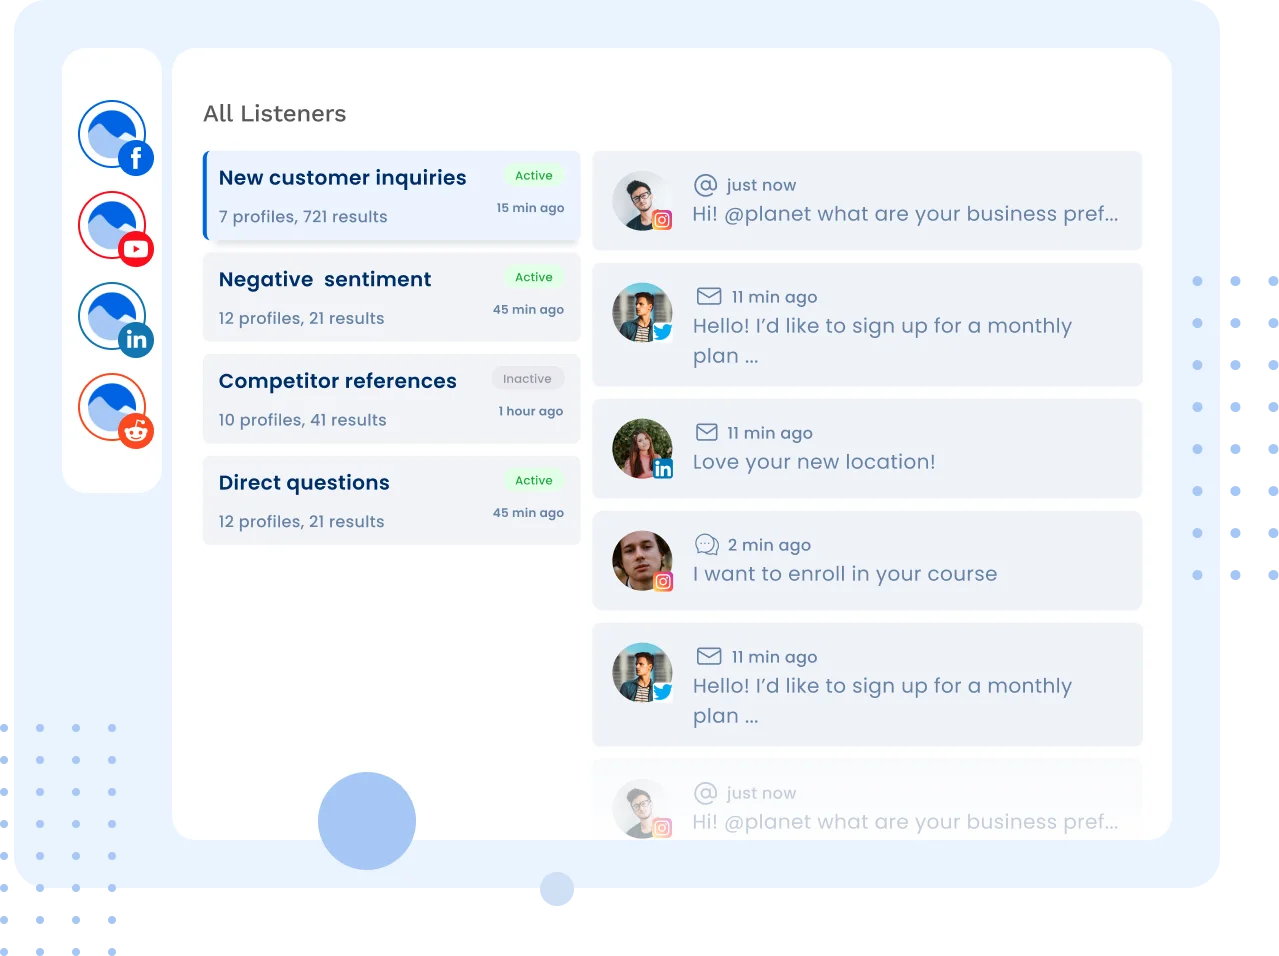 Uncover business-critical insights with social listening